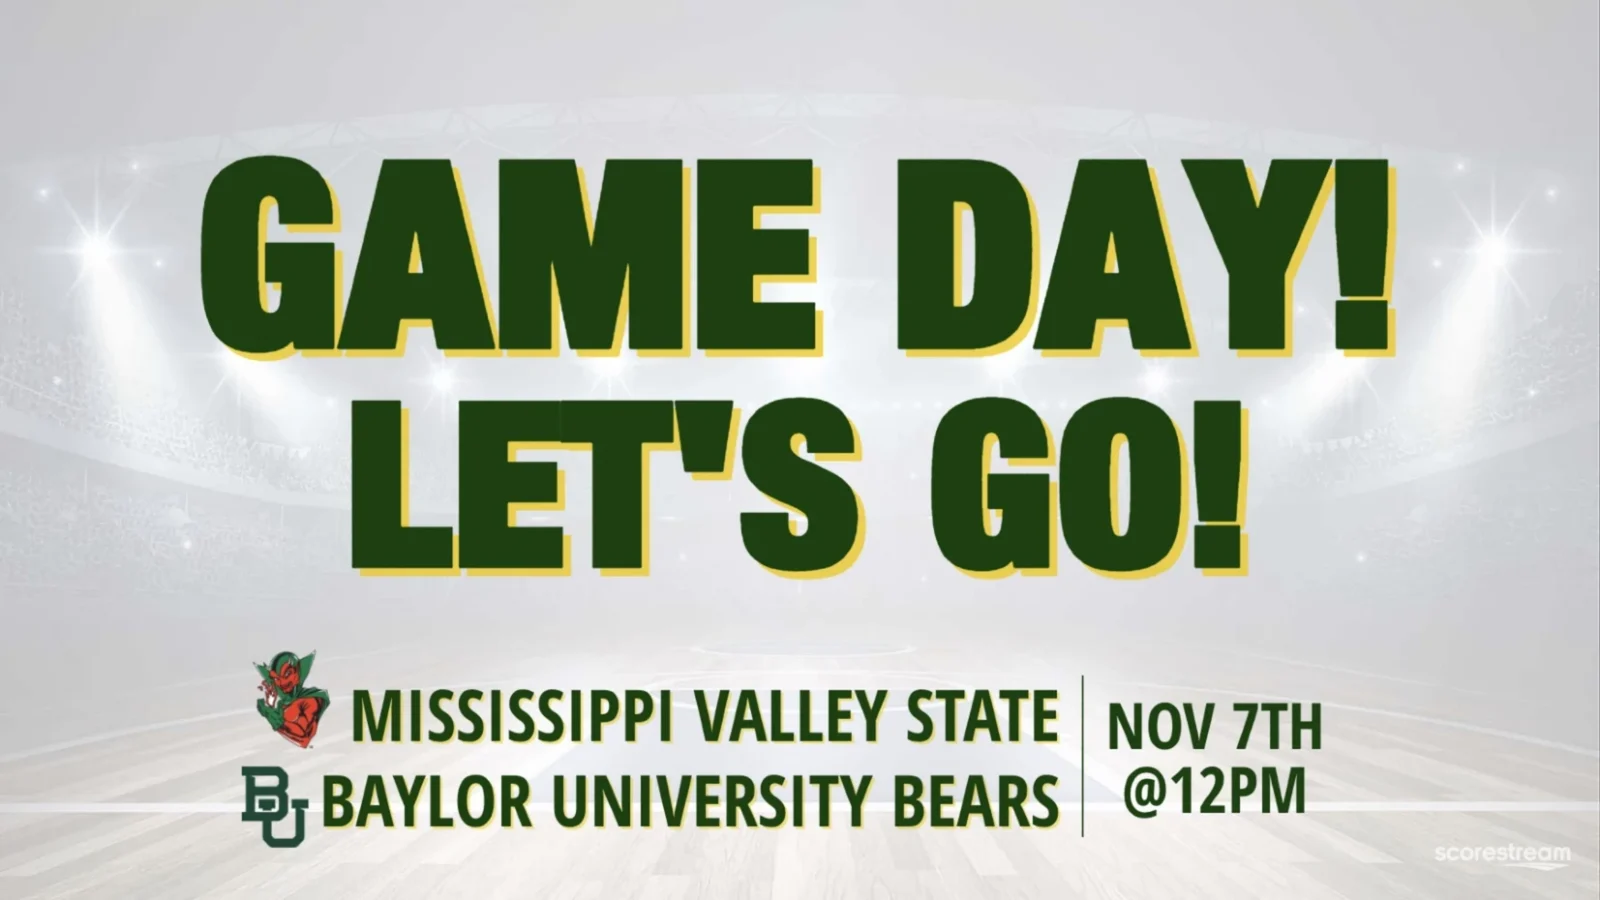 Watch Baylor vs Mississippi Valley State live streaming coverage today